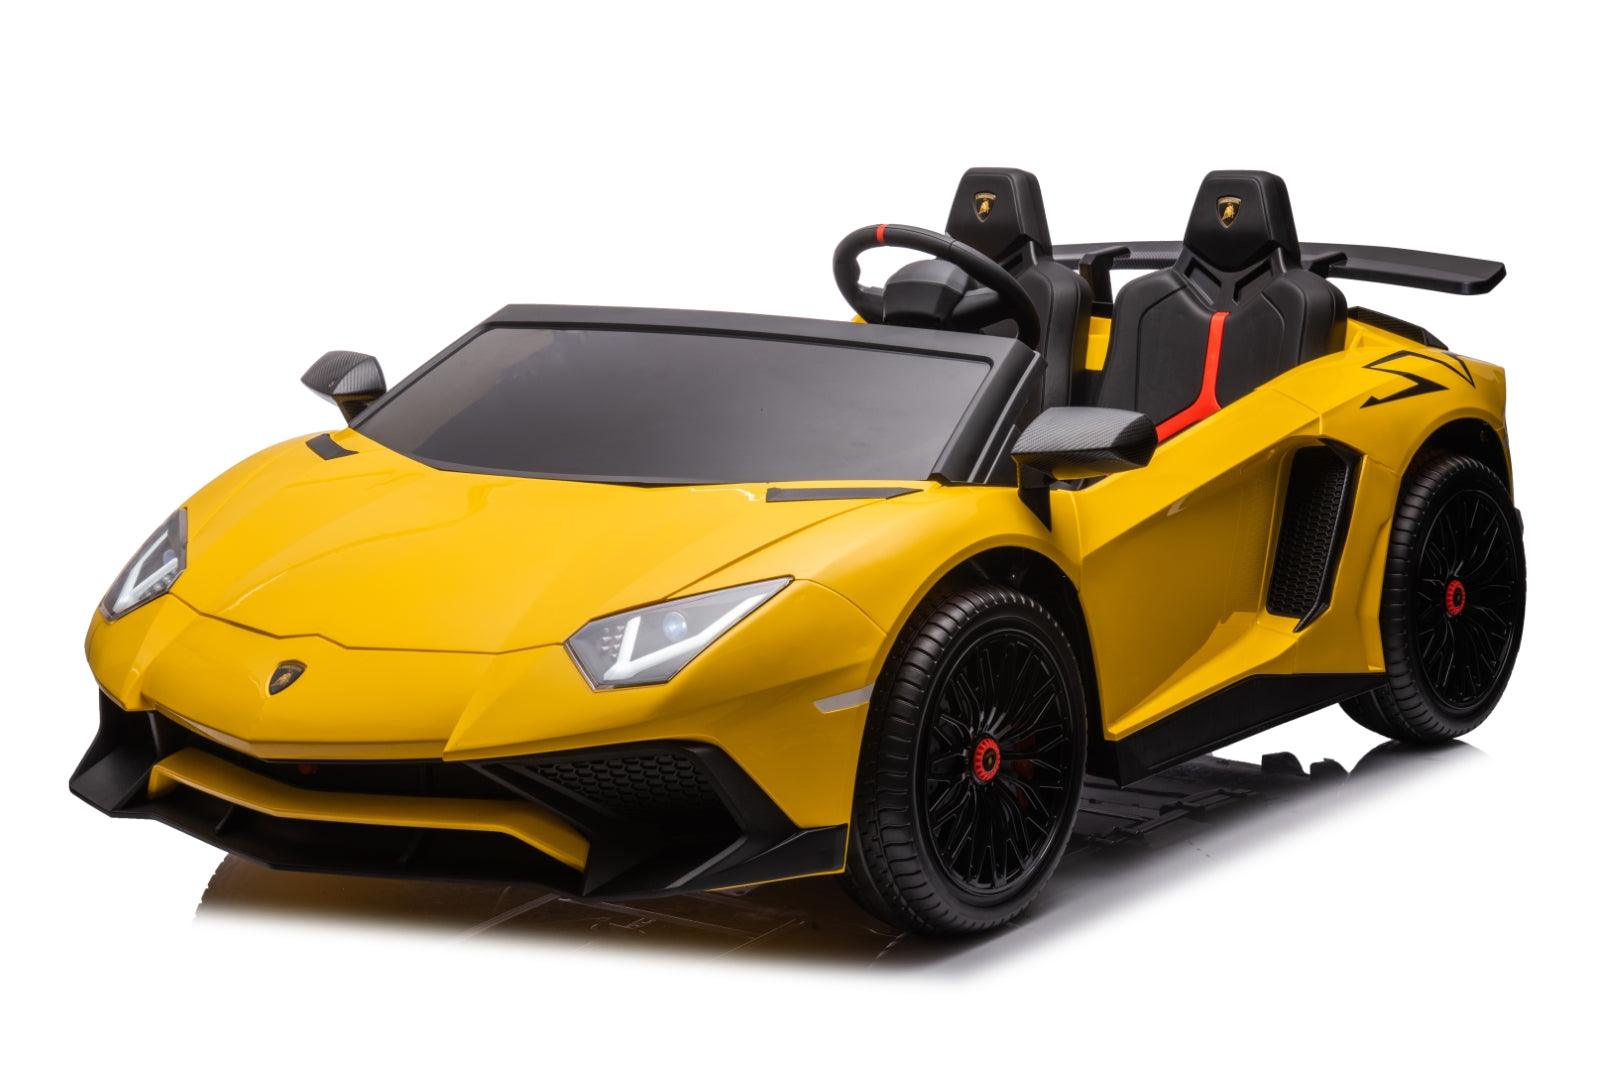 24V Lamborghini Aventador 2 Seater Ride On Car for Kids: Advanced Brushless Motor & Differential for High-Octane Fun - DTI Direct Canada